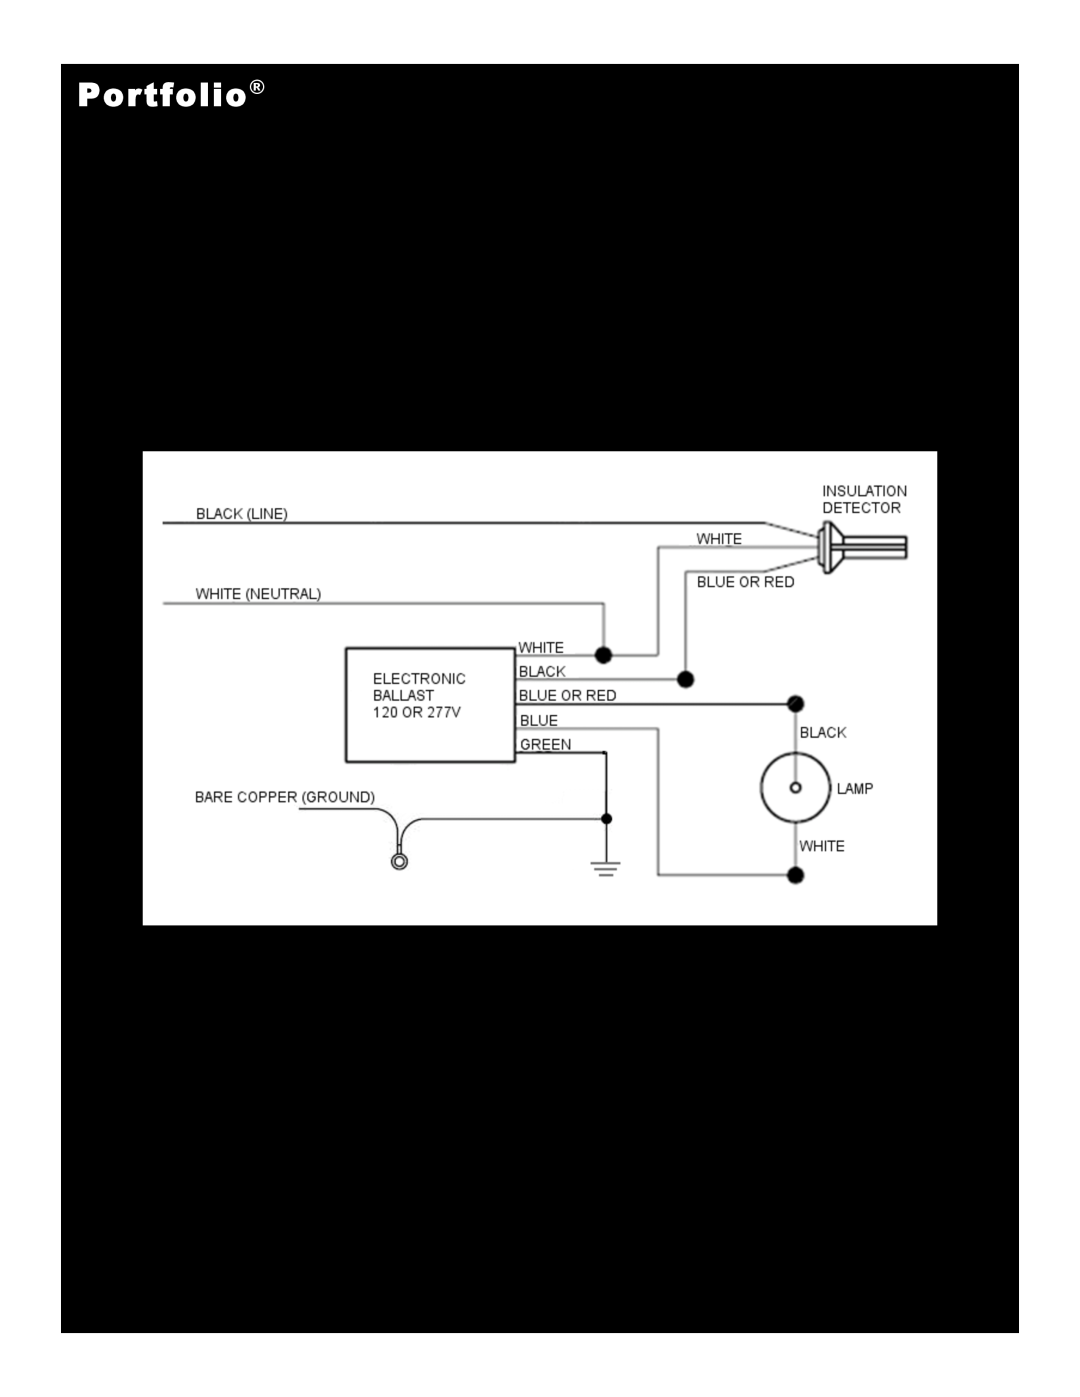 Cooper Lighting MD6CPxT4, MD6xT4, MD6xT6, MD6CPxT6 installation instructions Wiring Diagrams, Portfolio, 704530 Rev. A 